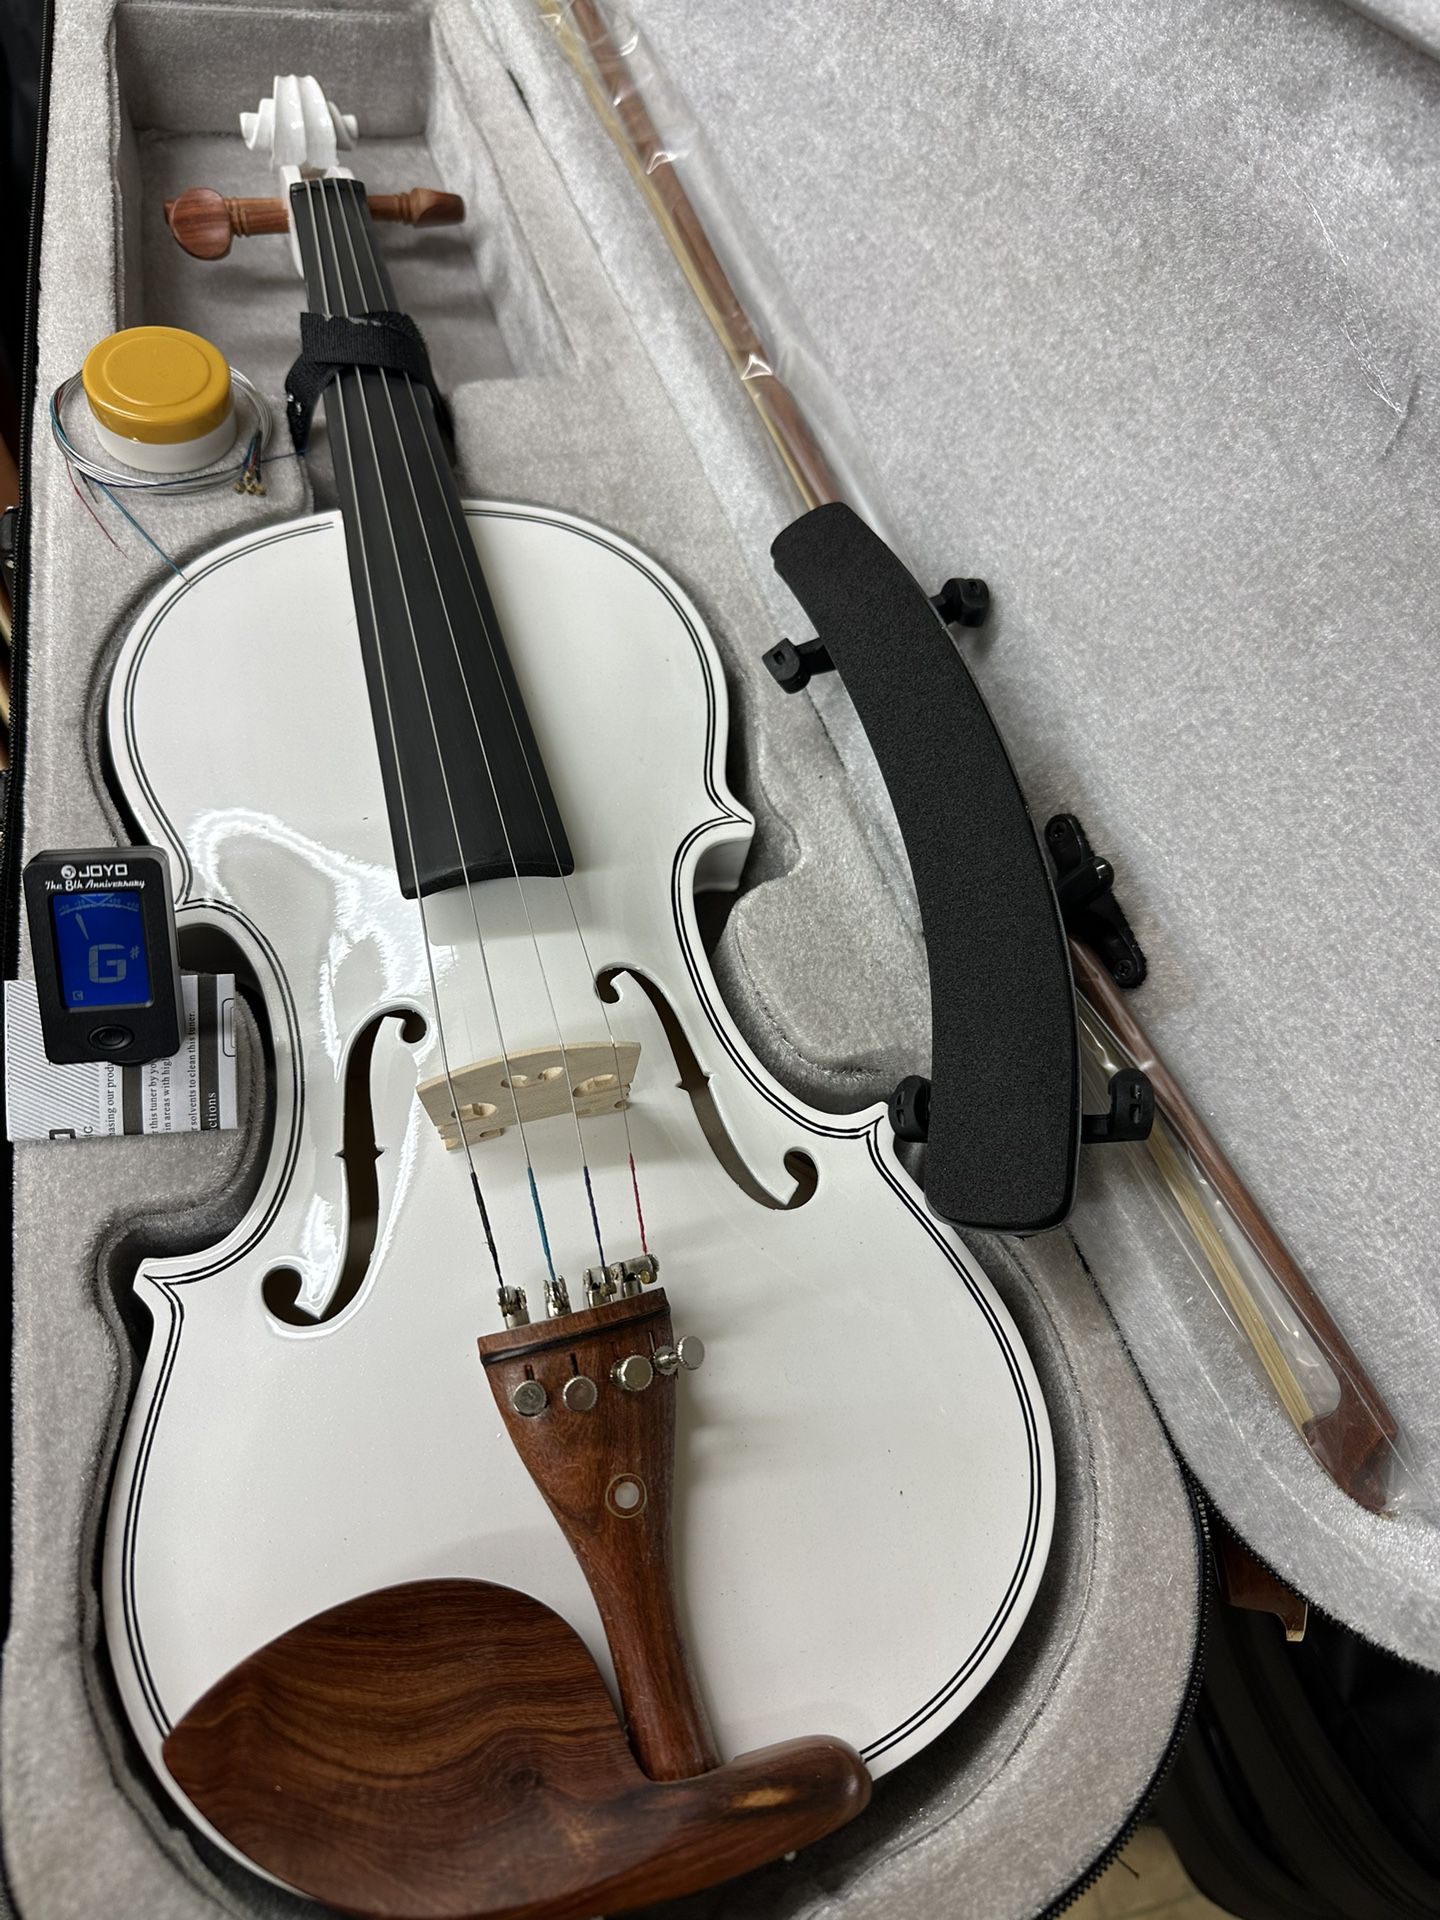 4/4 White Violin with New Bow, Shoulder Rest, Digital Tuner, Extra Strings $160 Firm